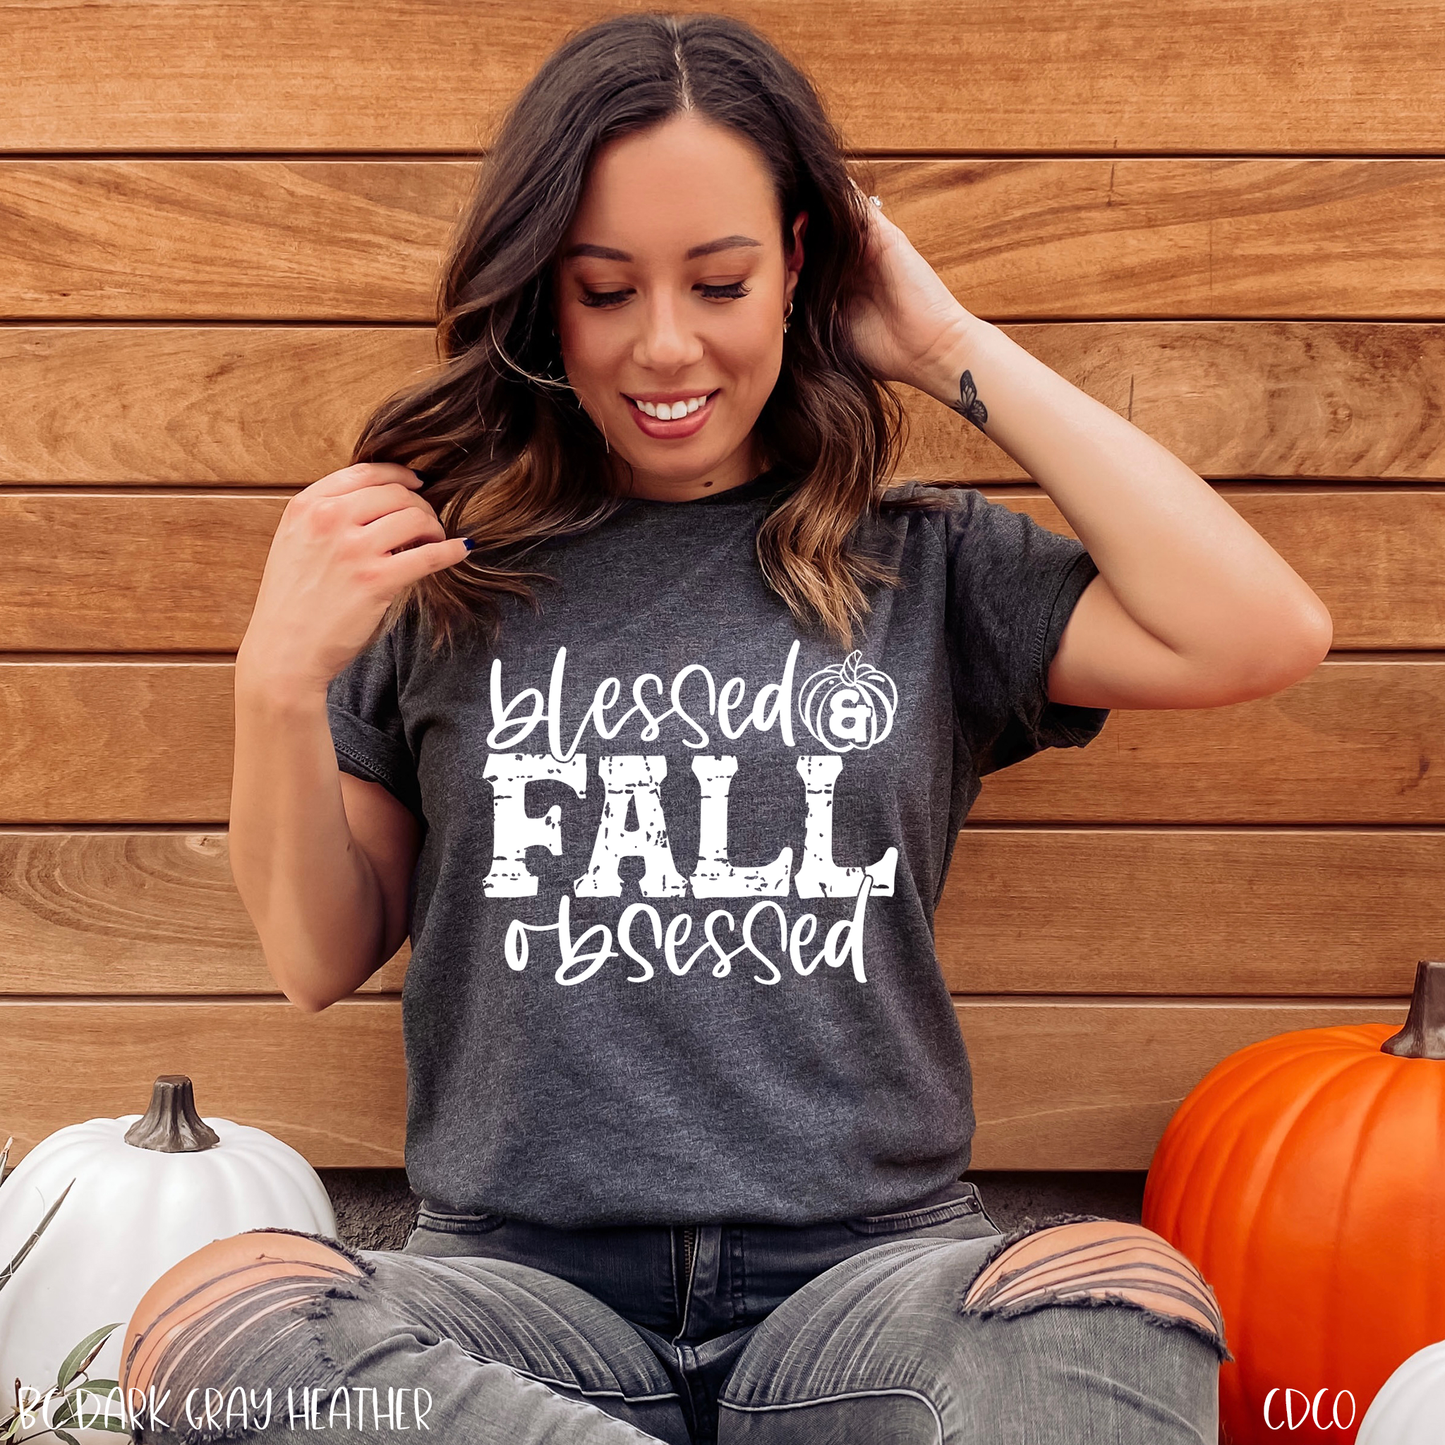 Blessed & Fall Obsessed (325°)